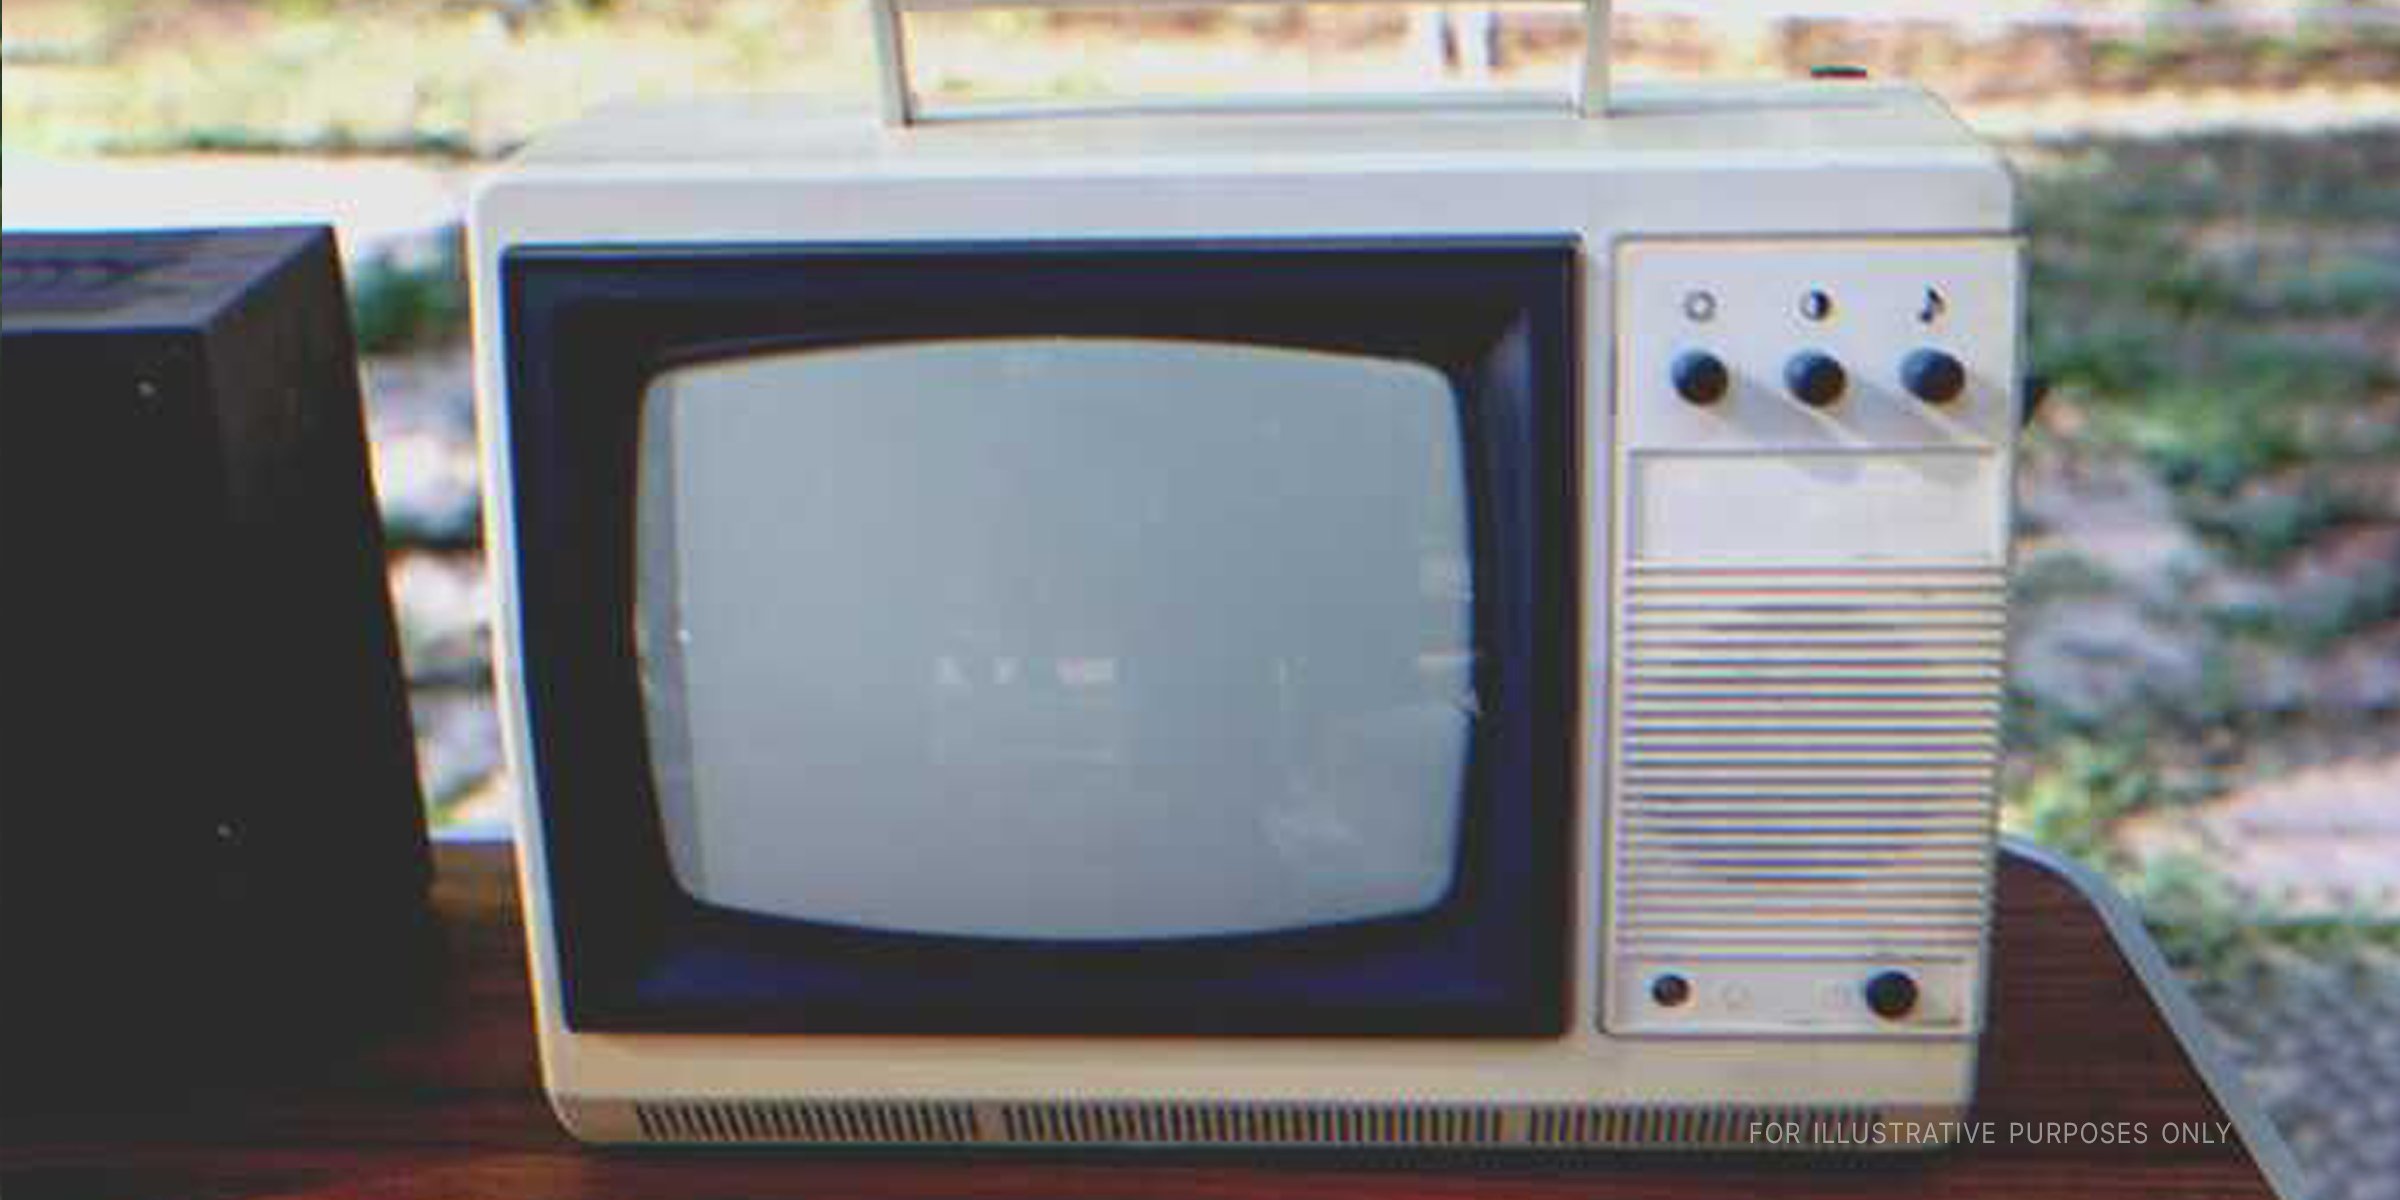 A vintage television. | Source: Shutterstock